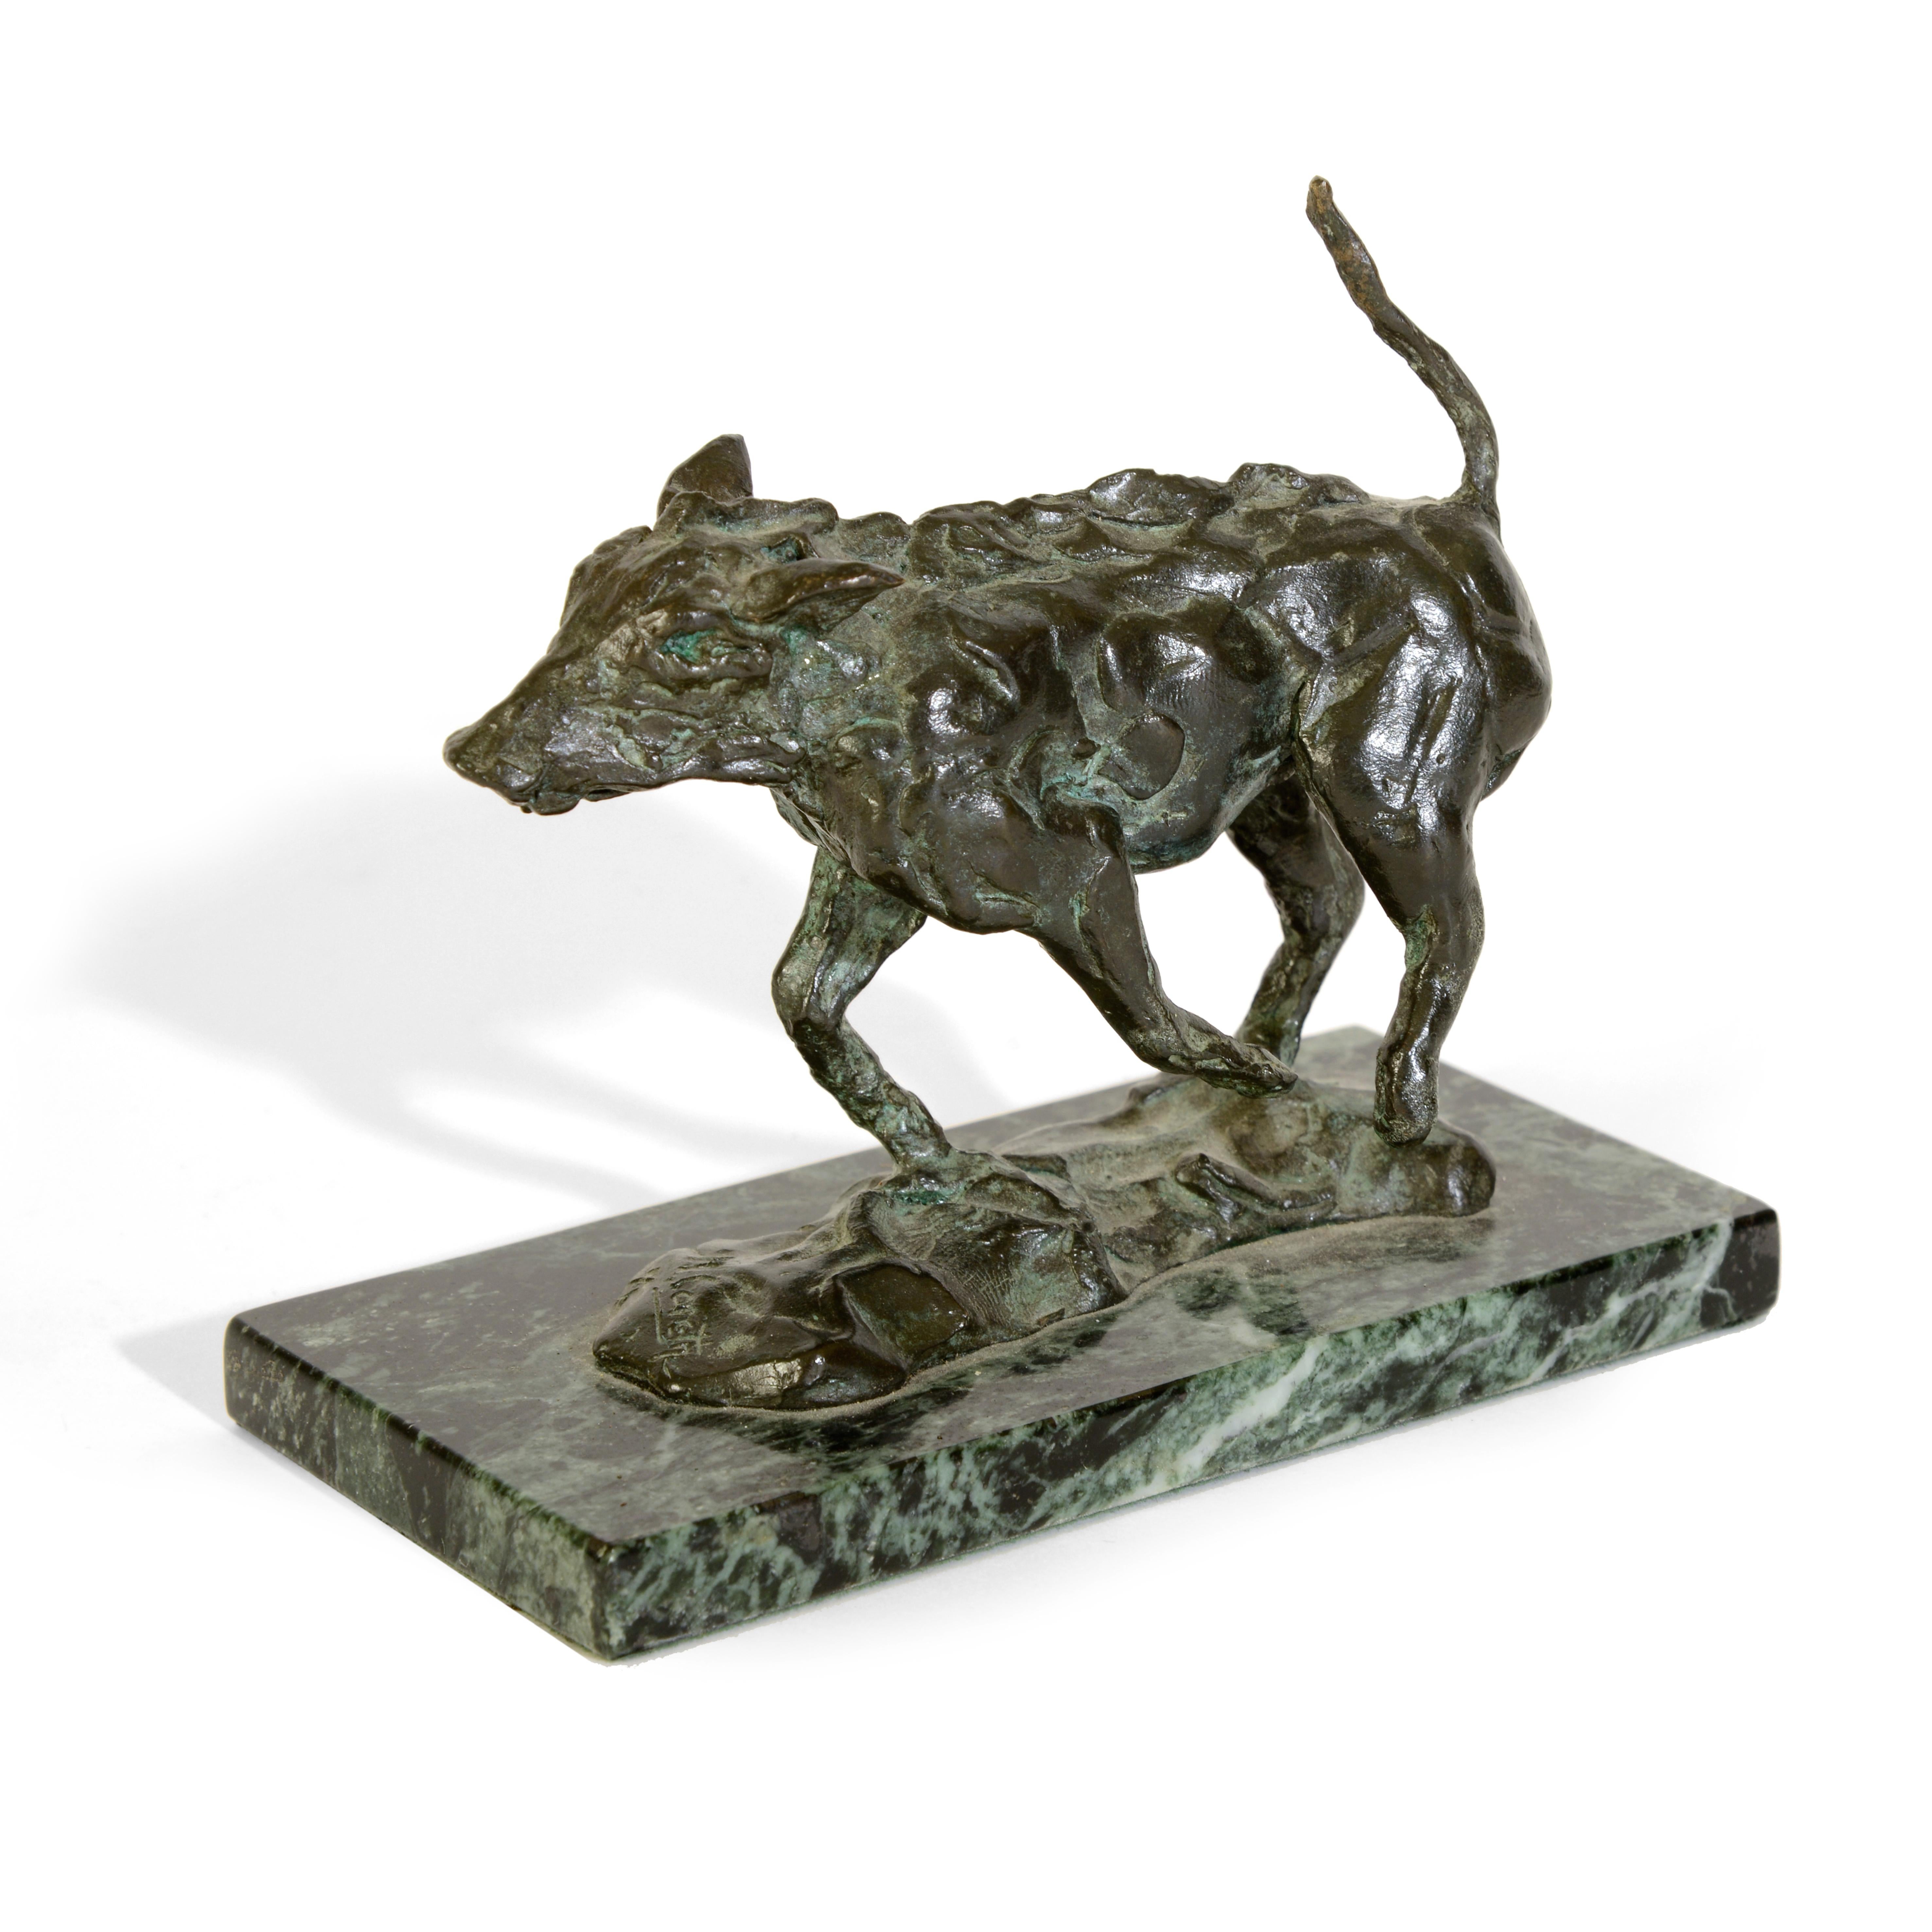 Mark Coreth (born 1958)
Warthog piglet
bronze on a green marble base
Signed limited edition, numbered 1/6

Mark Coreth is an international master sculptor of wildlife subjects.  His work reflects his instinctive understanding of the movement of the